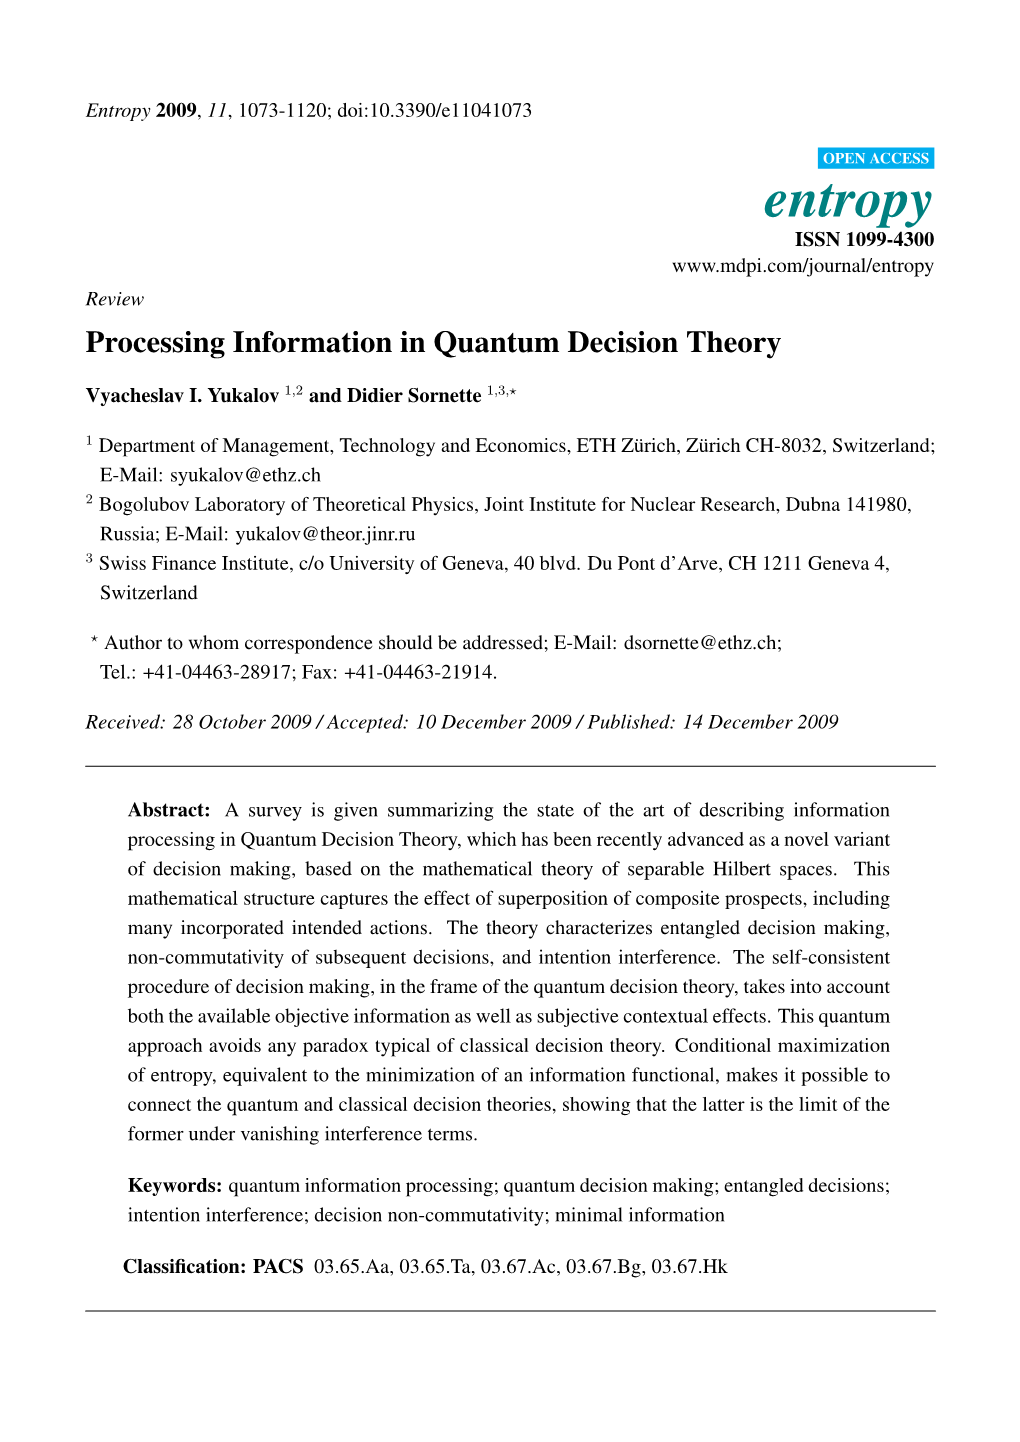 Processing Information in Quantum Decision Theory